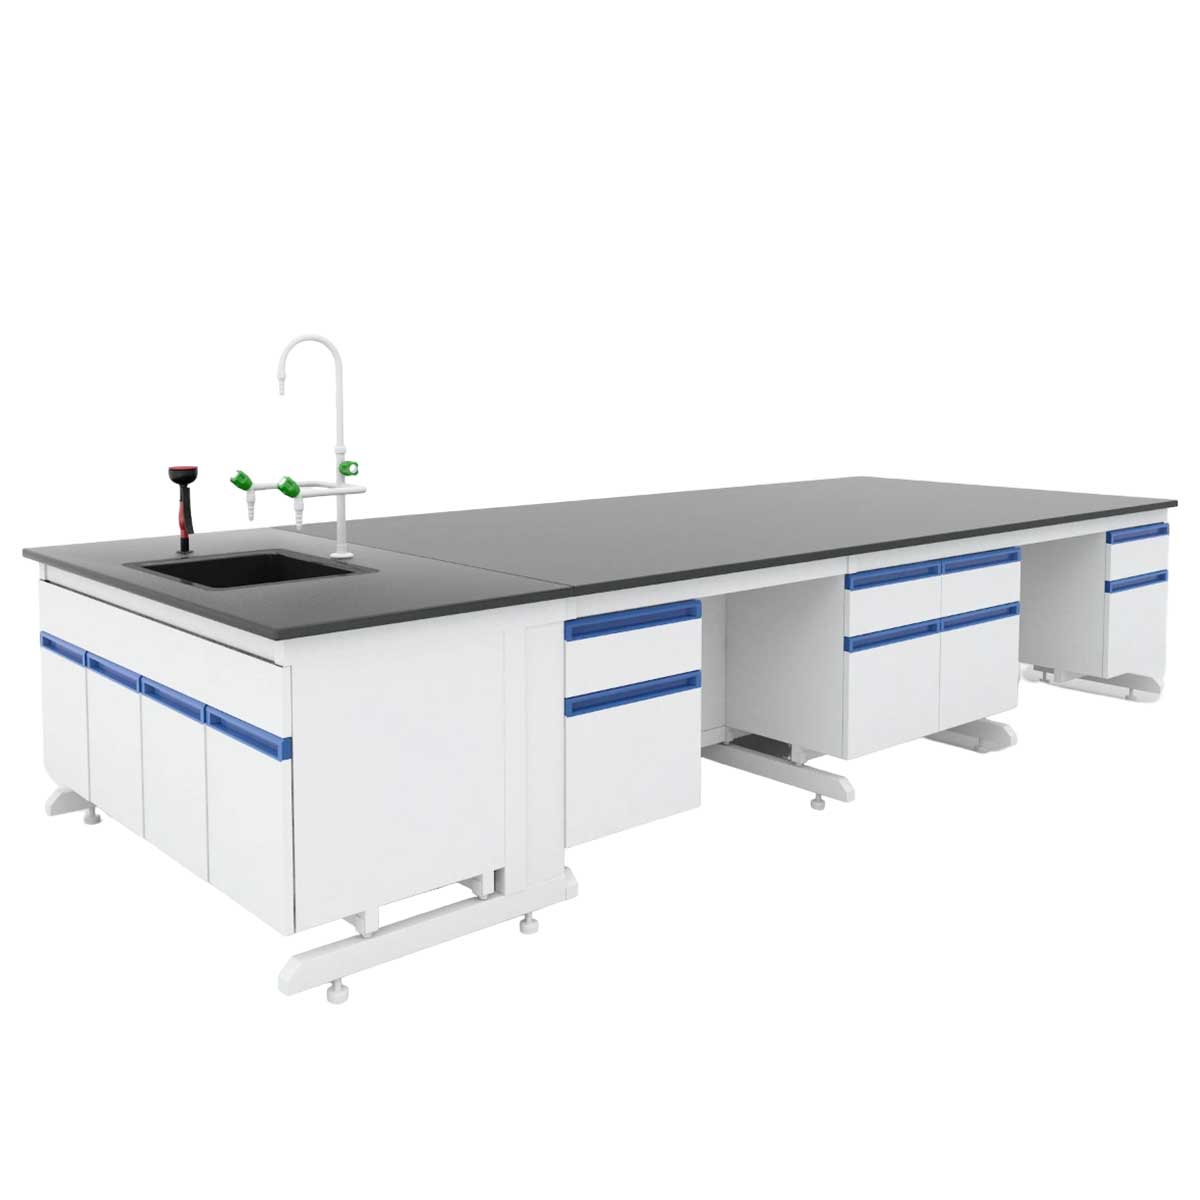 Physics Lab Furniture Manufacturers, Suppliers in Rohini Sector 2